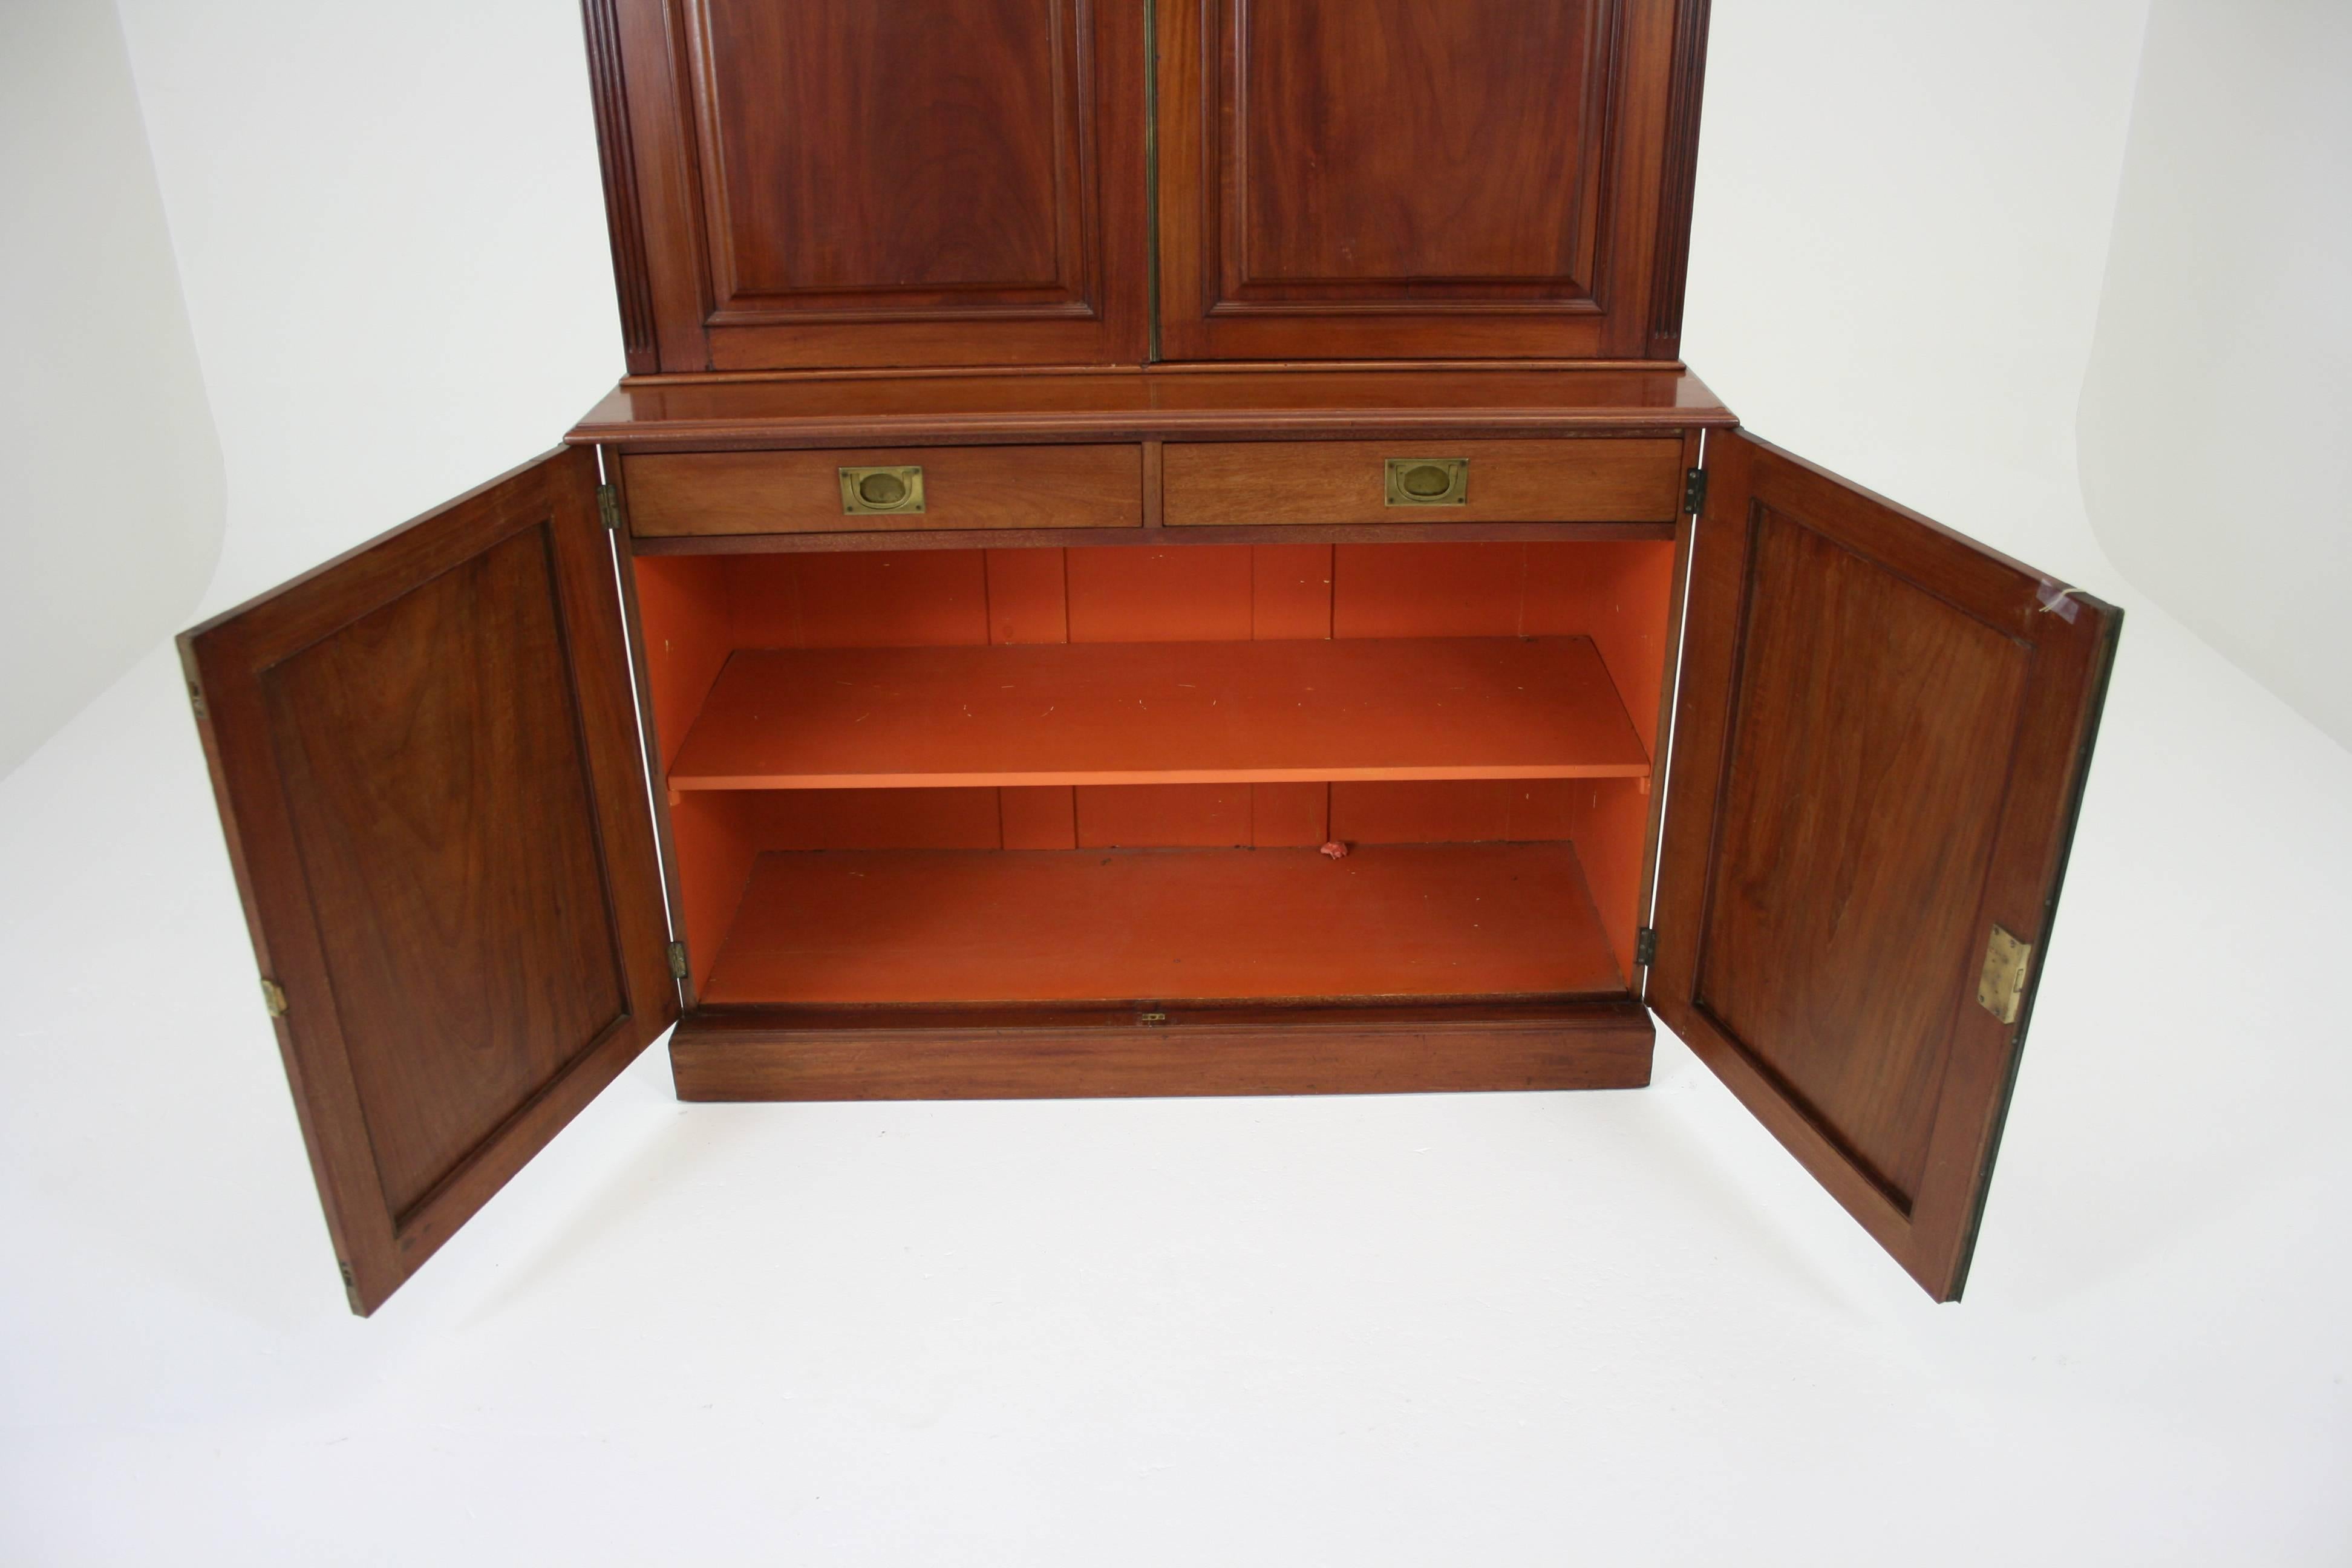 Office cabinet antique bookcase antique mahogany postal cabinet B775

Scotland
1870
Solid mahogany construction
All original, painted top interior
Two panelled doors above fitted with adjustable shelves interior
Two panelled doors below